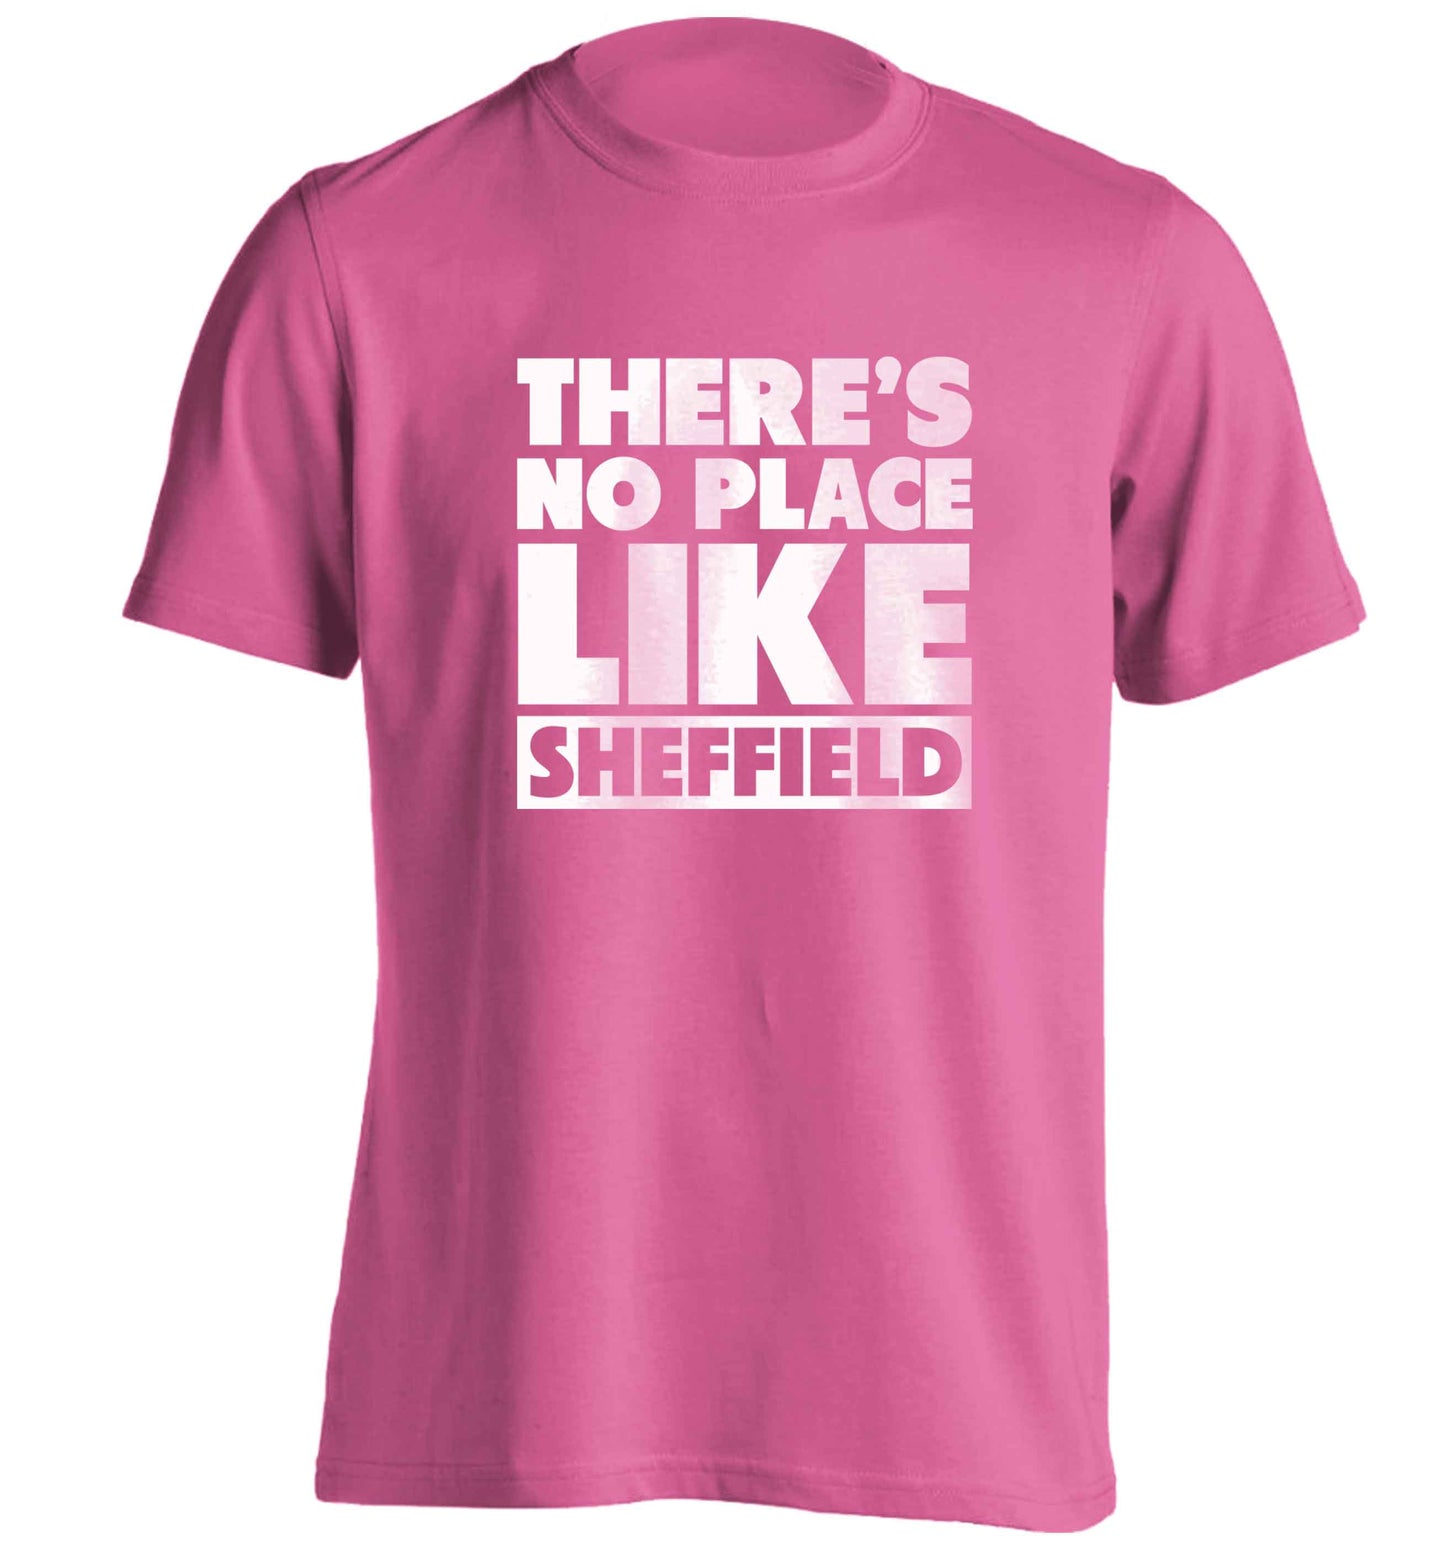 There's no place like Sheffield adults unisex pink Tshirt 2XL